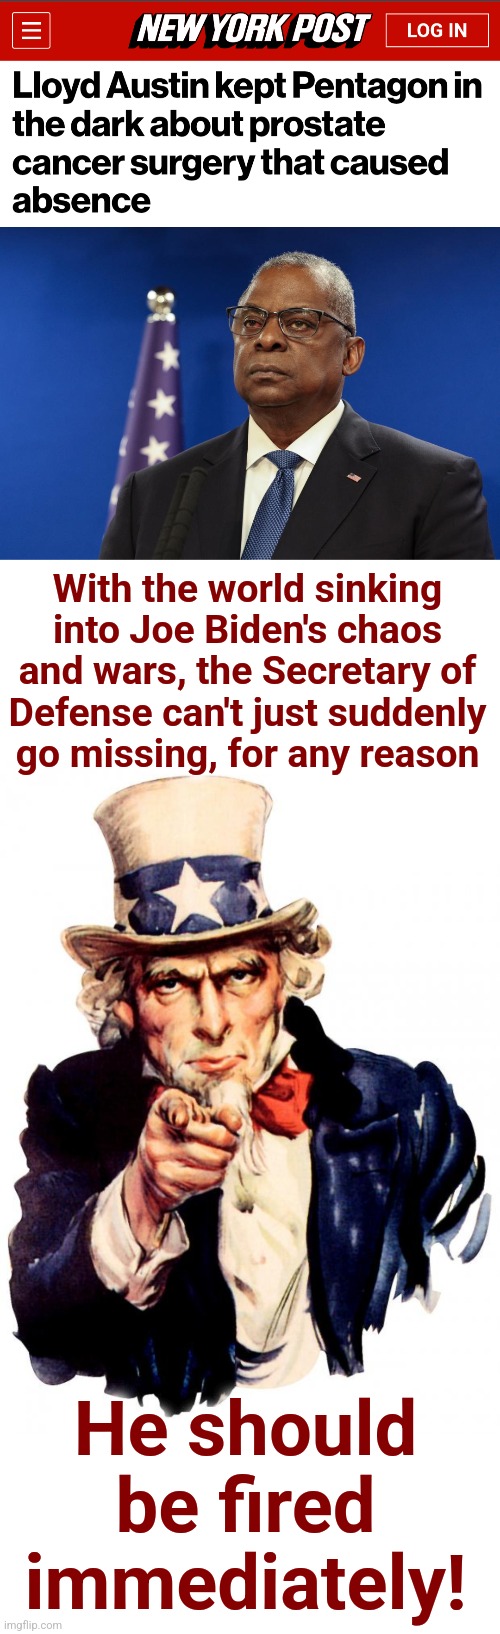 But in the accountability-free world of democrats, he'll almost certainly get a free pass | With the world sinking into Joe Biden's chaos and wars, the Secretary of
Defense can't just suddenly
go missing, for any reason; He should be fired immediately! | image tagged in memes,uncle sam,joe biden,lloyd austin,secretary of defense,missing | made w/ Imgflip meme maker